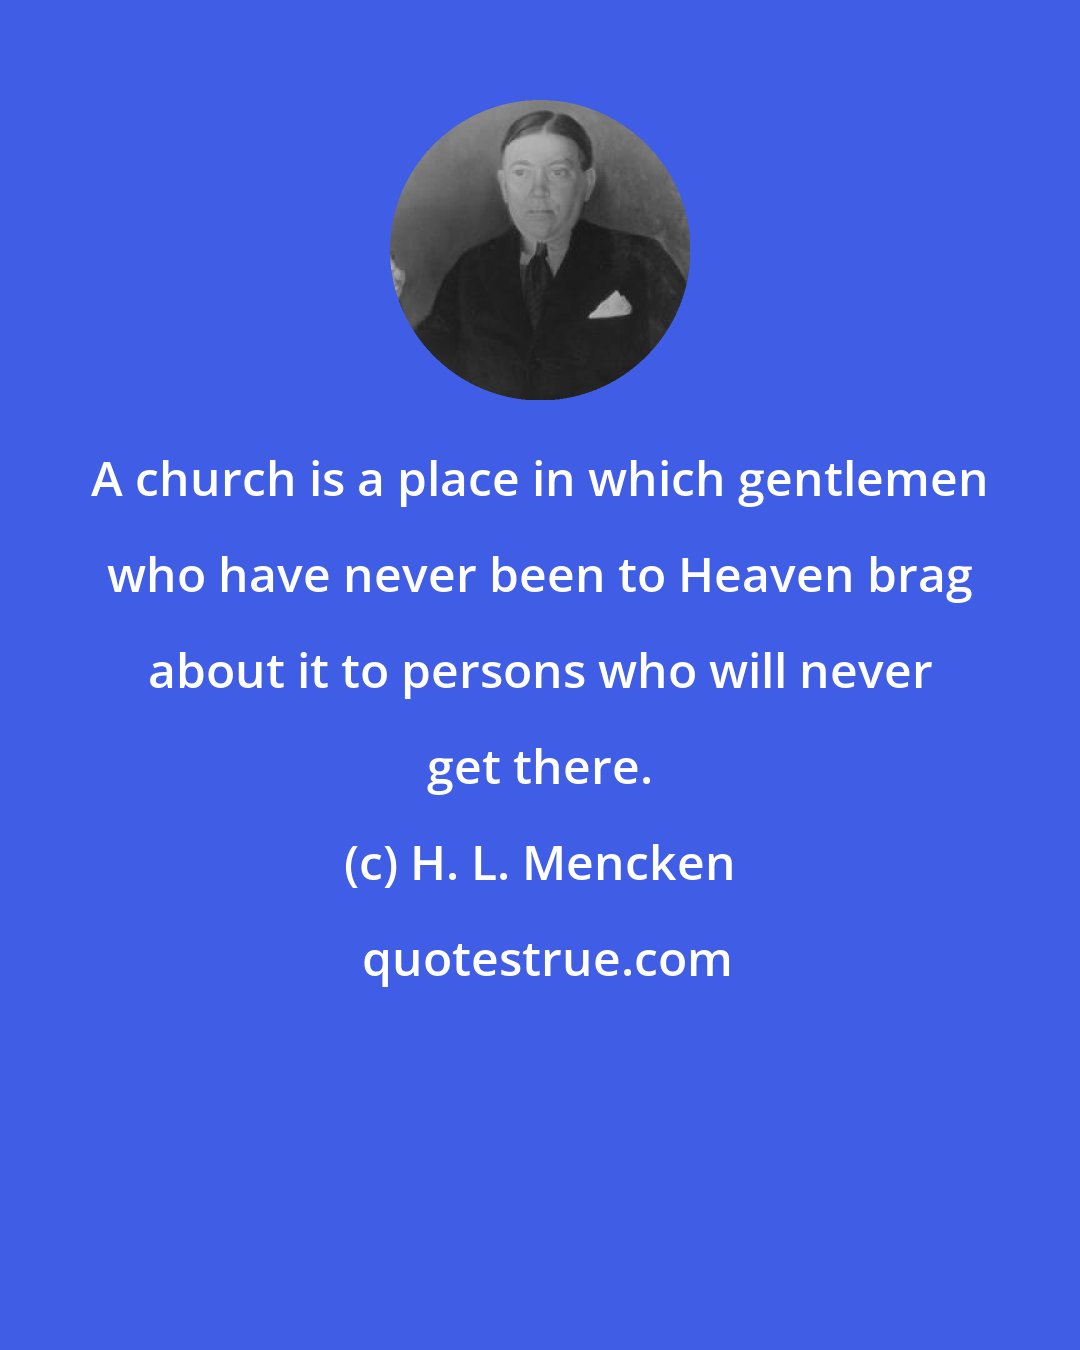 H. L. Mencken: A church is a place in which gentlemen who have never been to Heaven brag about it to persons who will never get there.